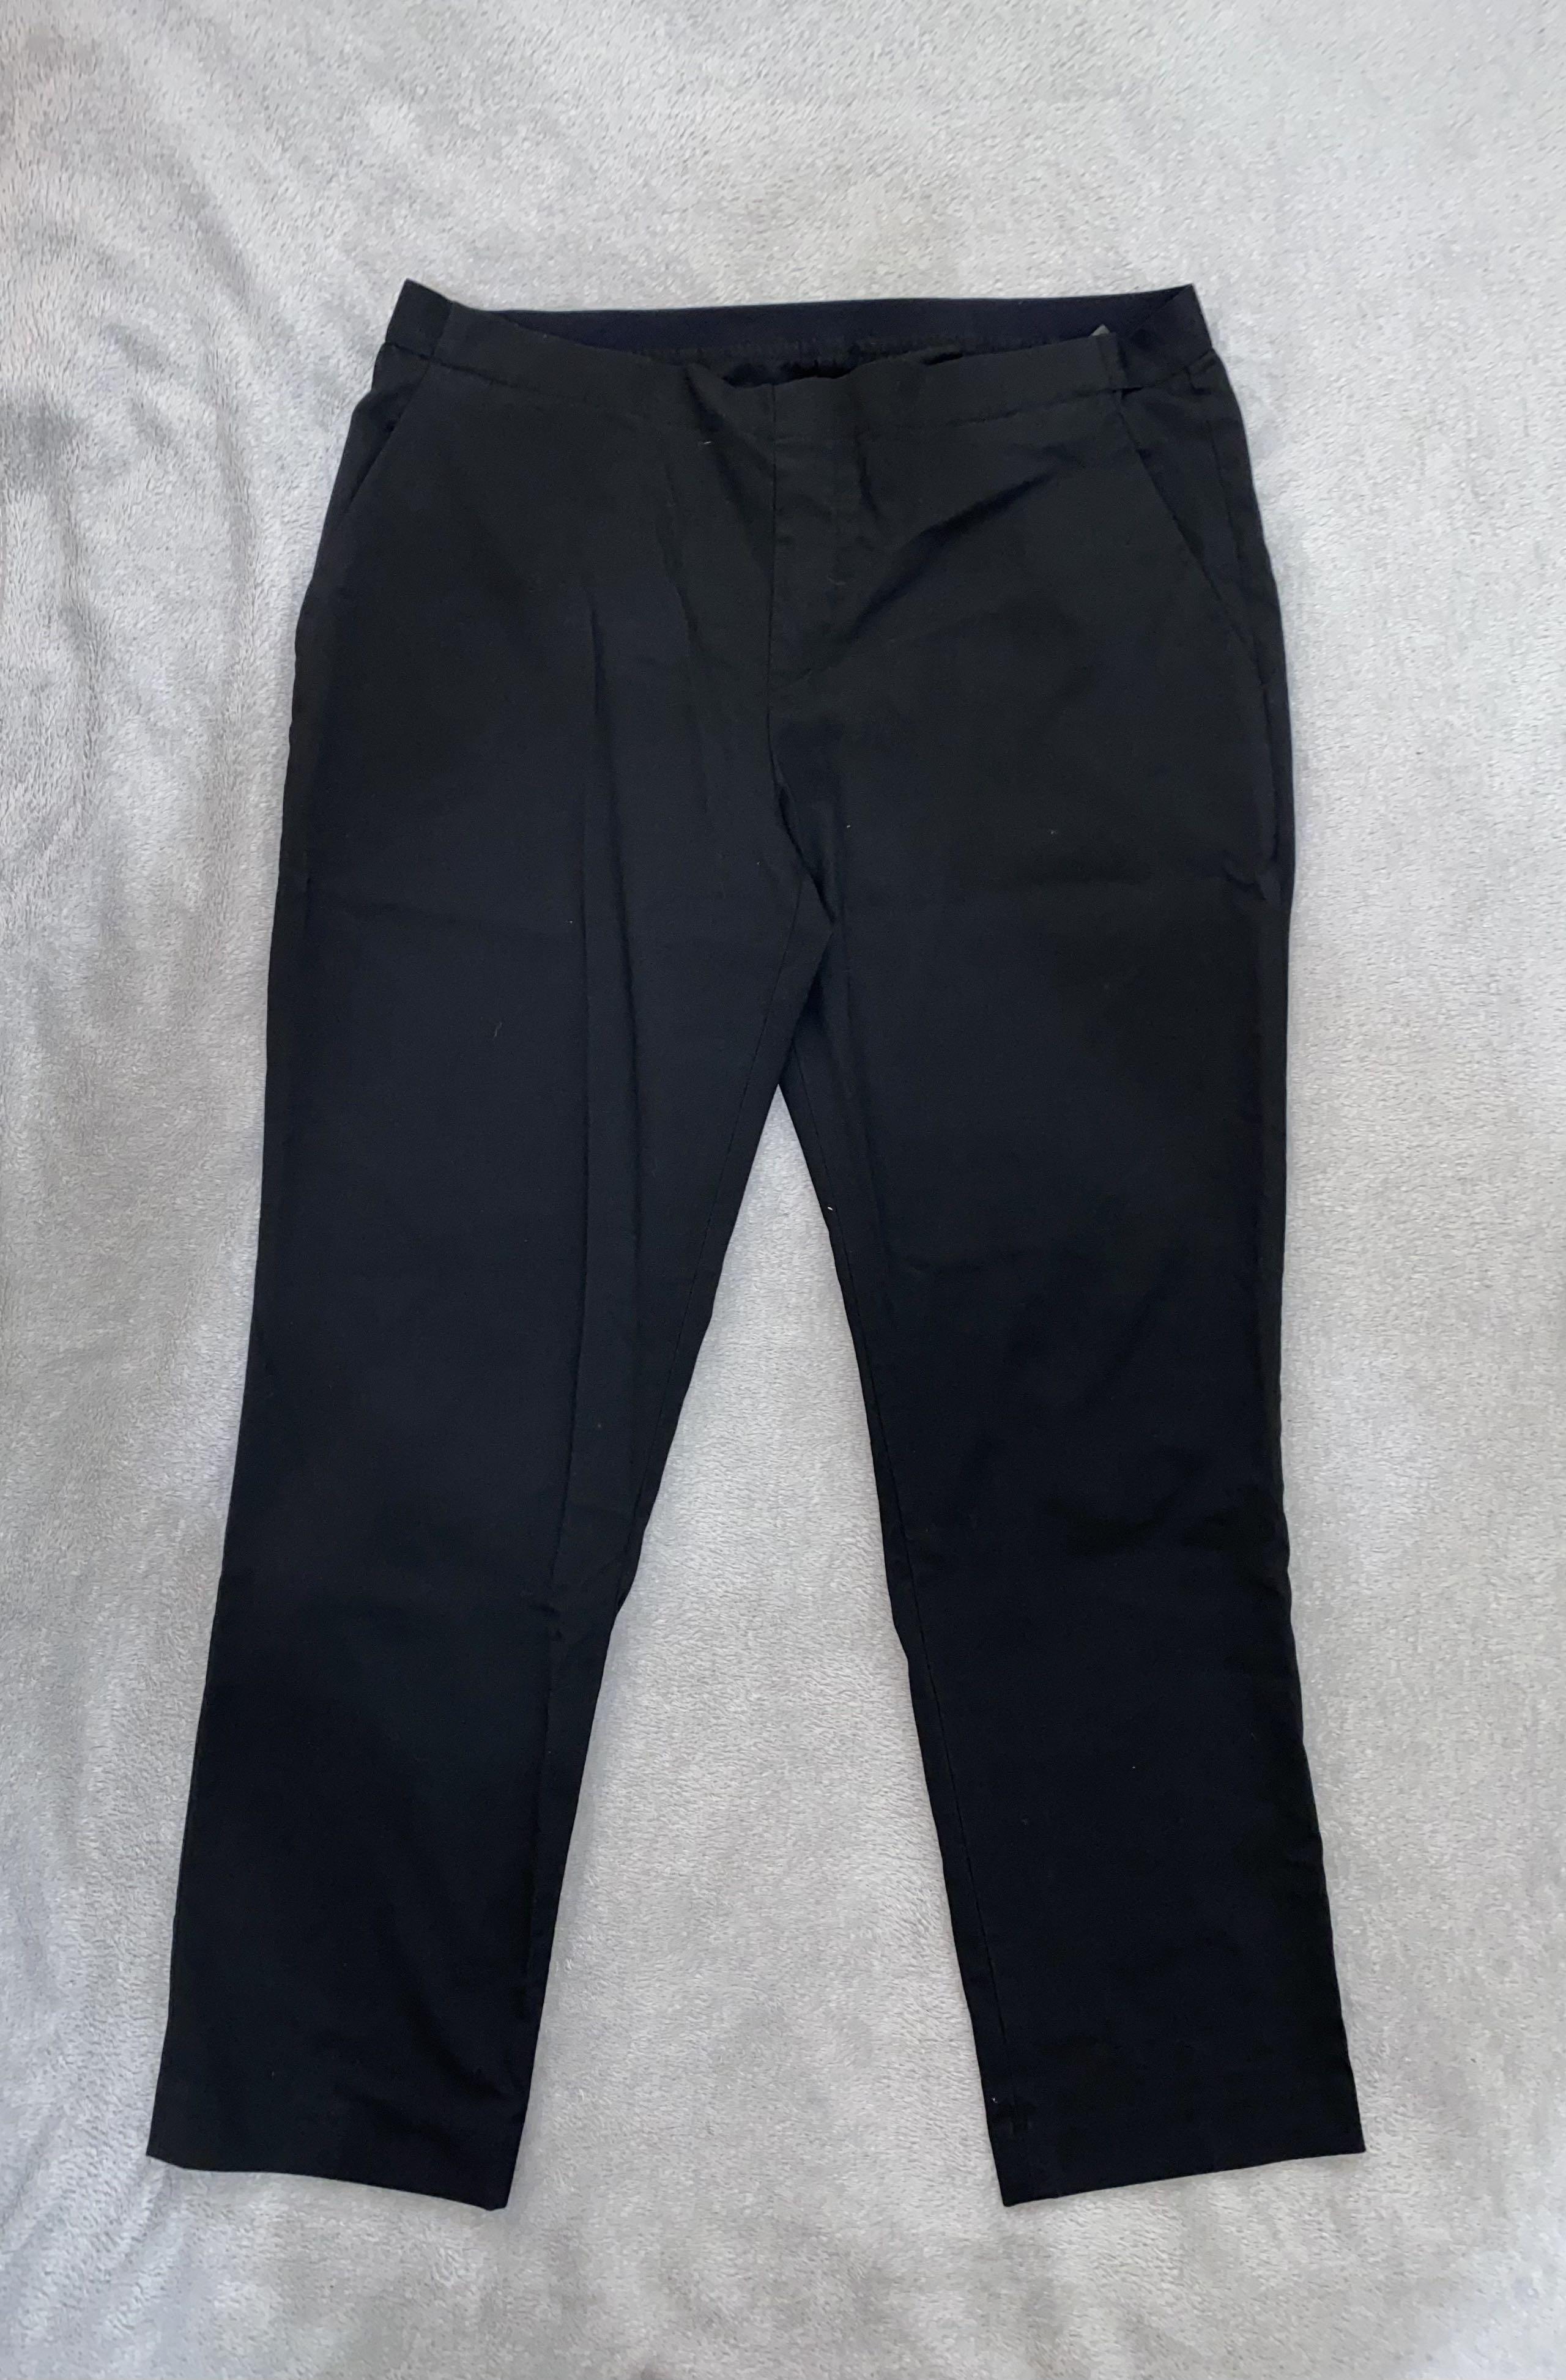 Uniqlo (XL) Ankle Length Smart Pants, Women's Fashion, Bottoms, Other ...